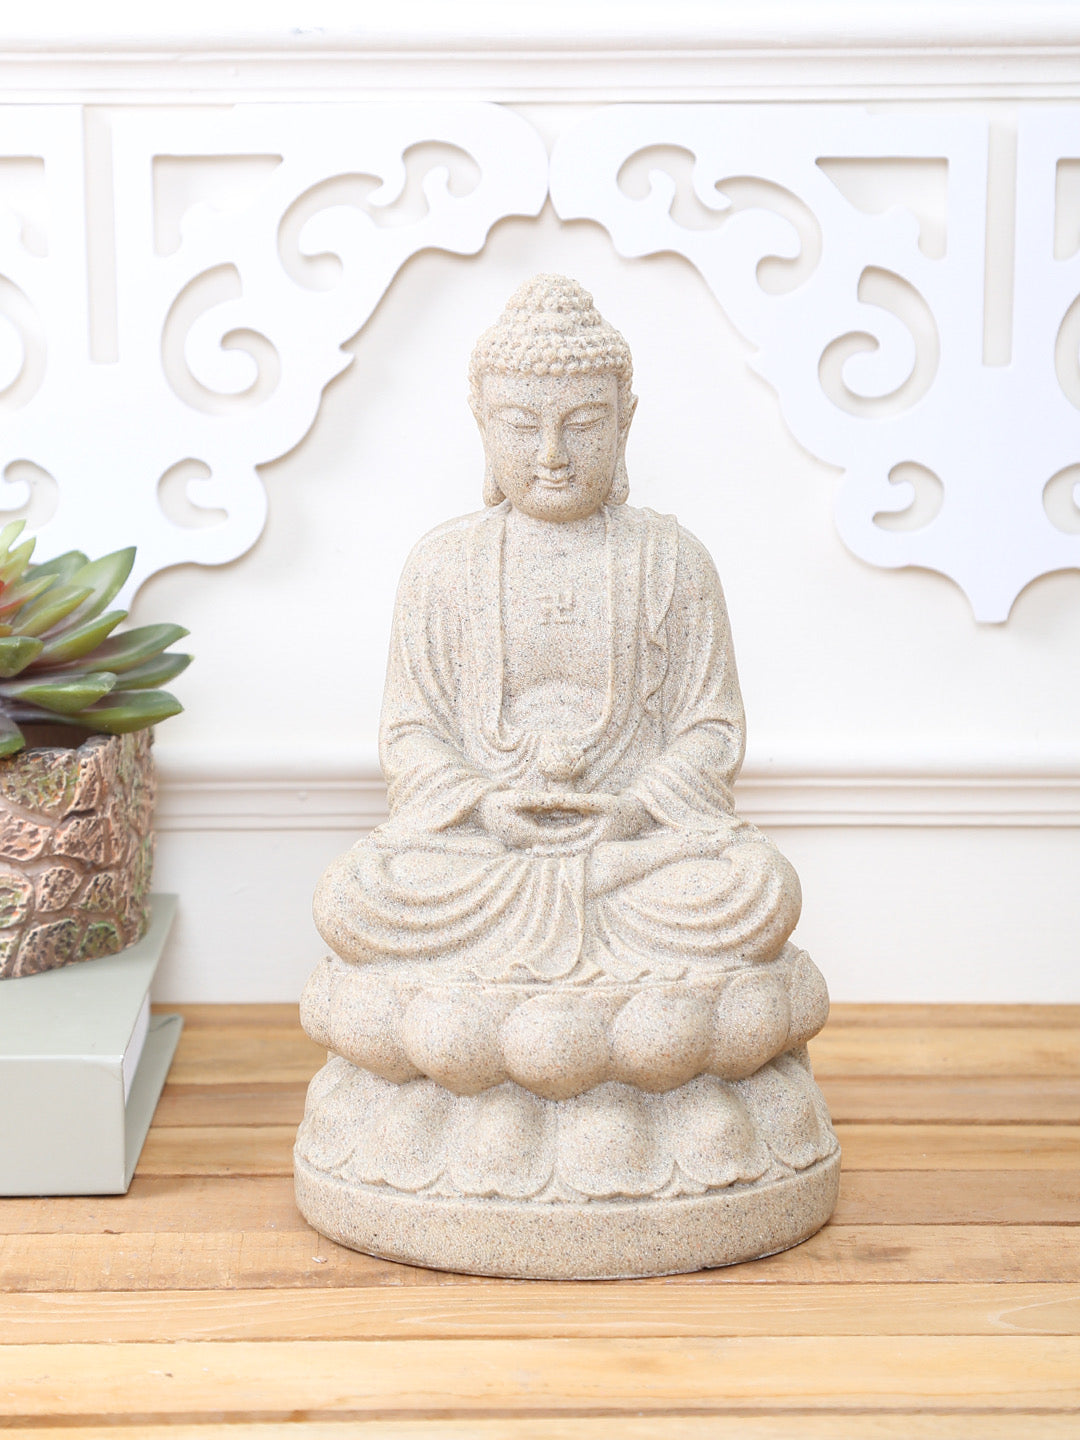 Antique Styled Feng Shui Buddha Statue - Default Title (REF19663)